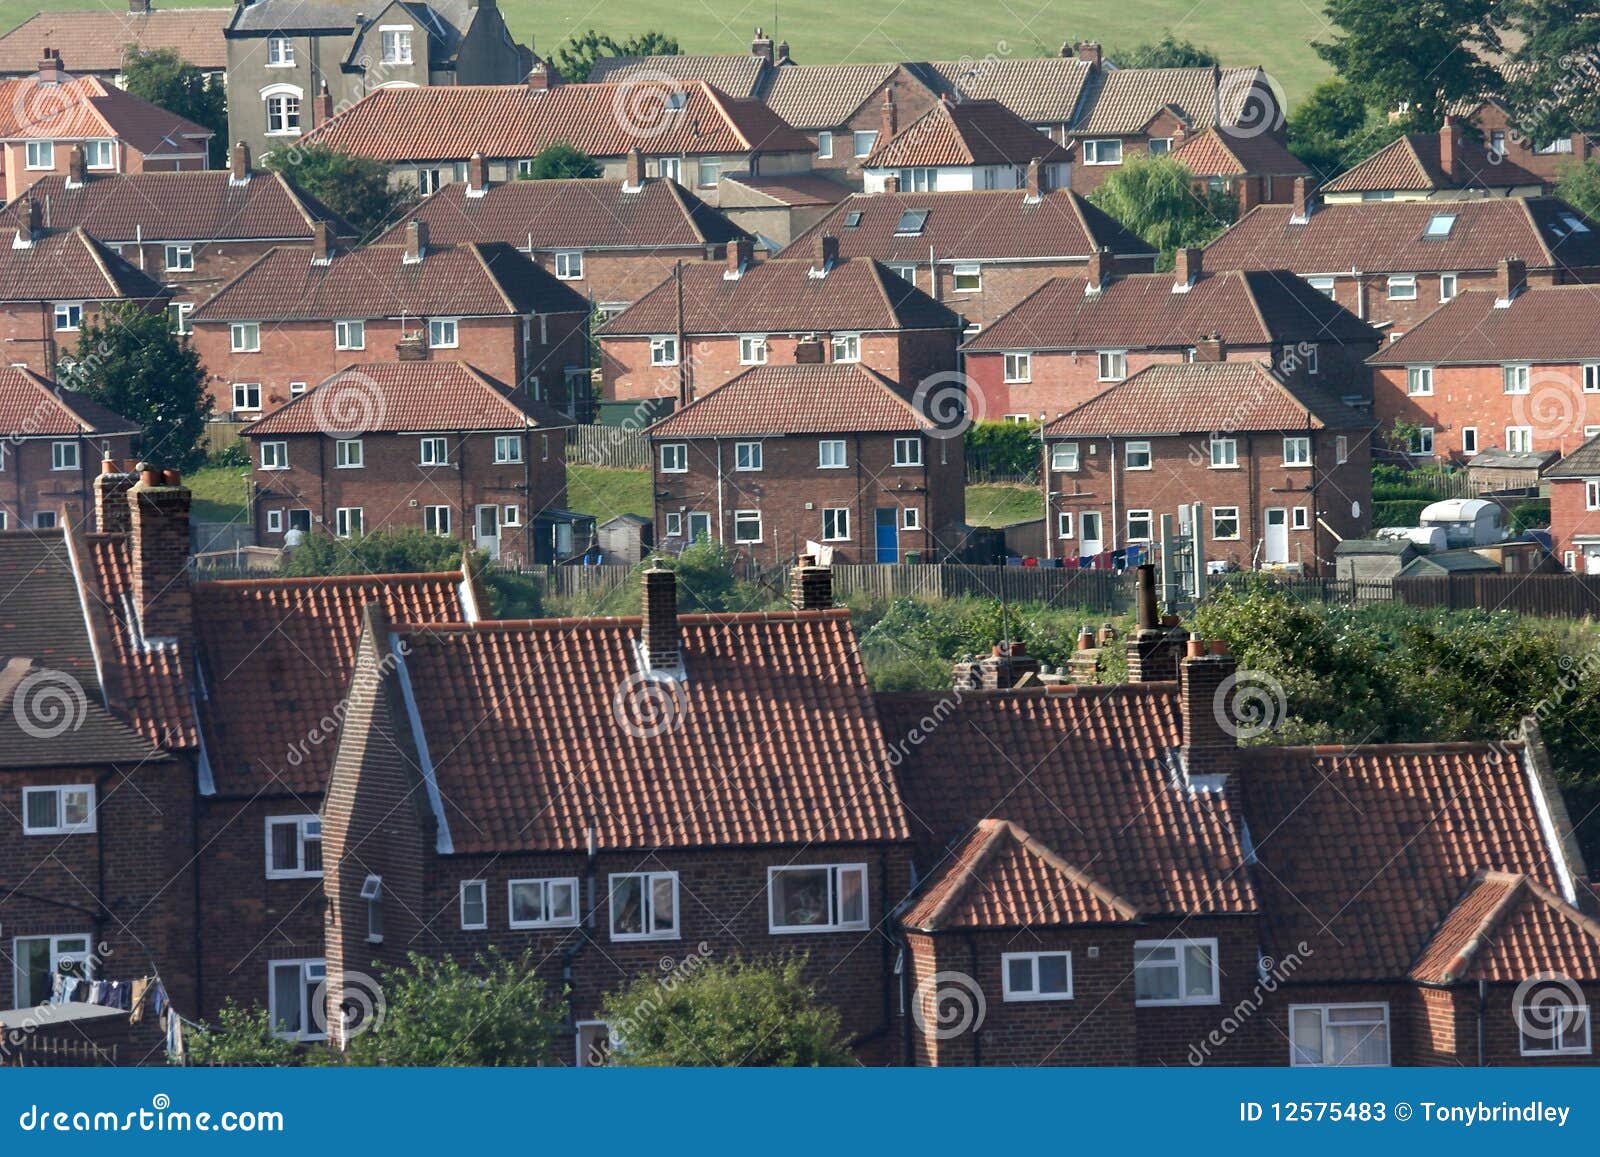 Late 20th Century housing. Late 20th Century housing estate in Whitby, Yorkshire, England.